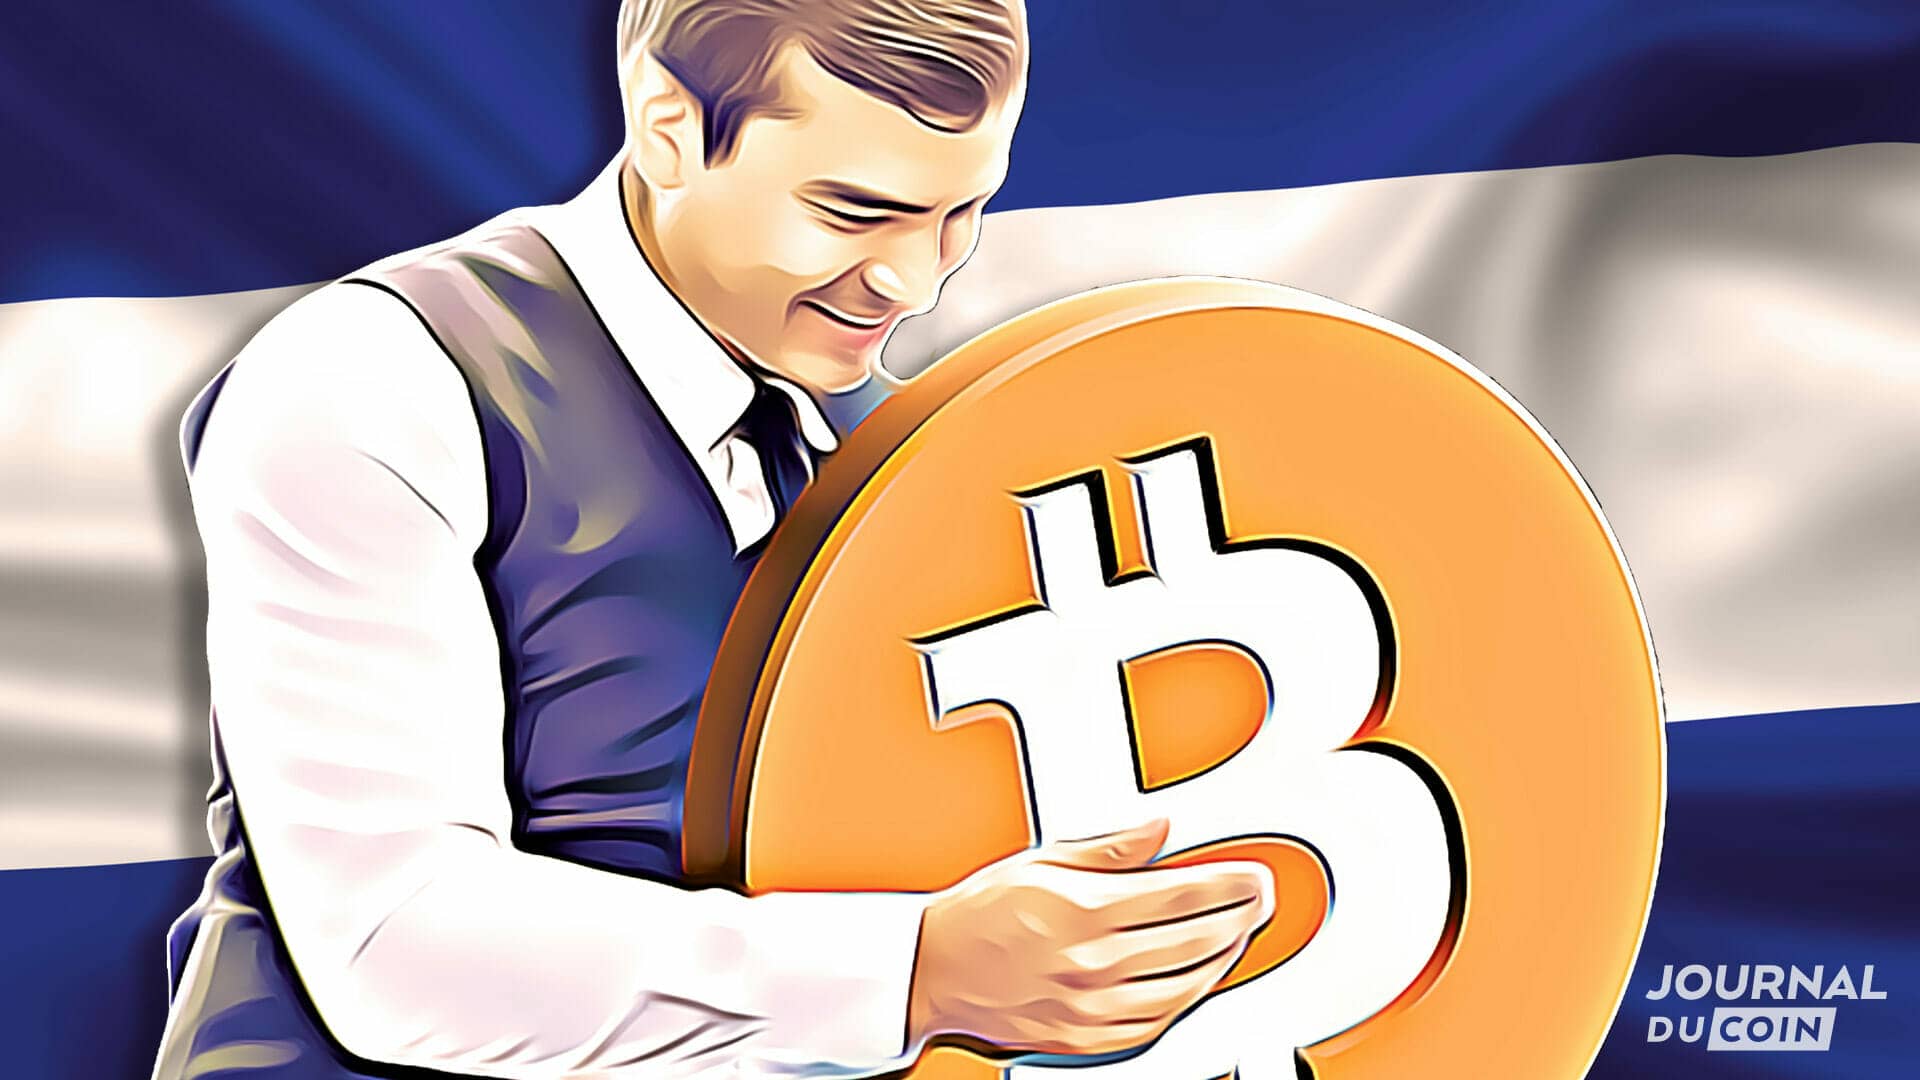 After Bitcoin, El Salvador seems to want to define a crypto-specific regulatory framework.